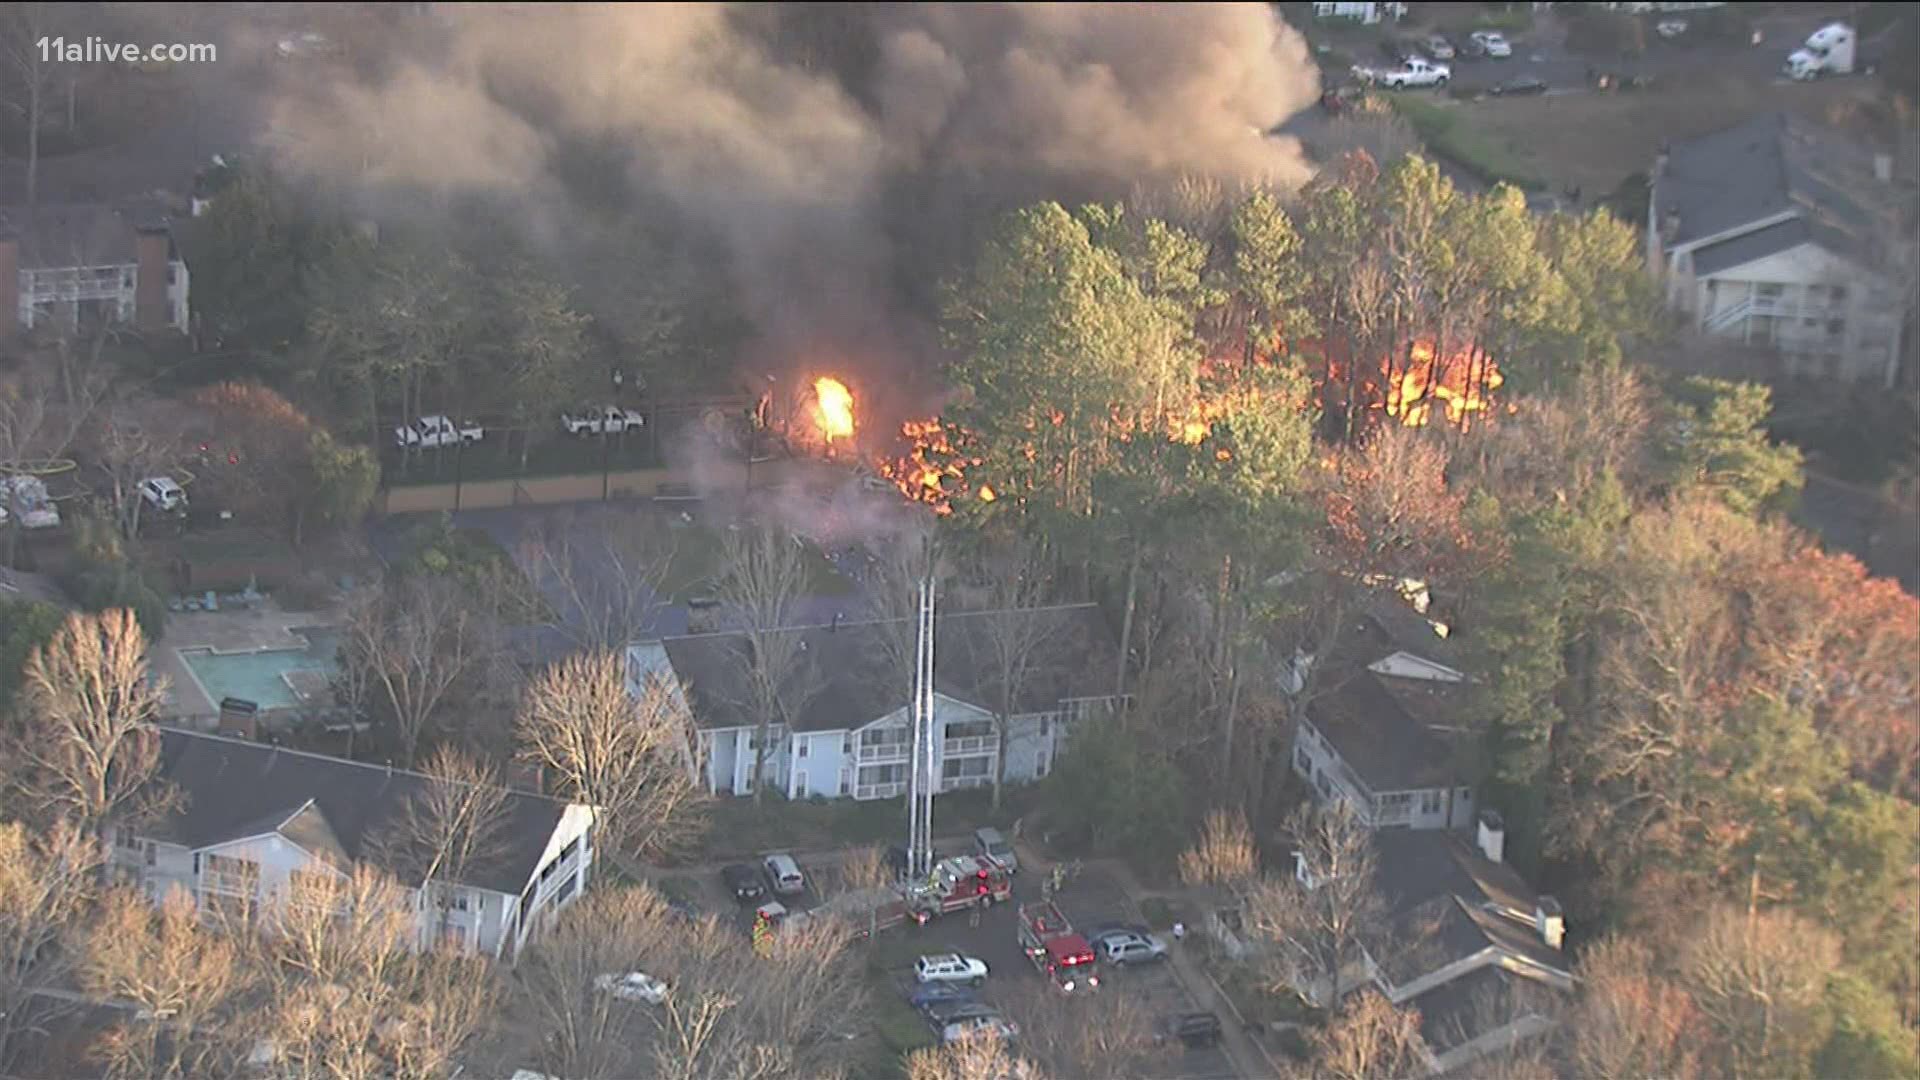 The explosion and fire burned at least one apartment building to the ground.